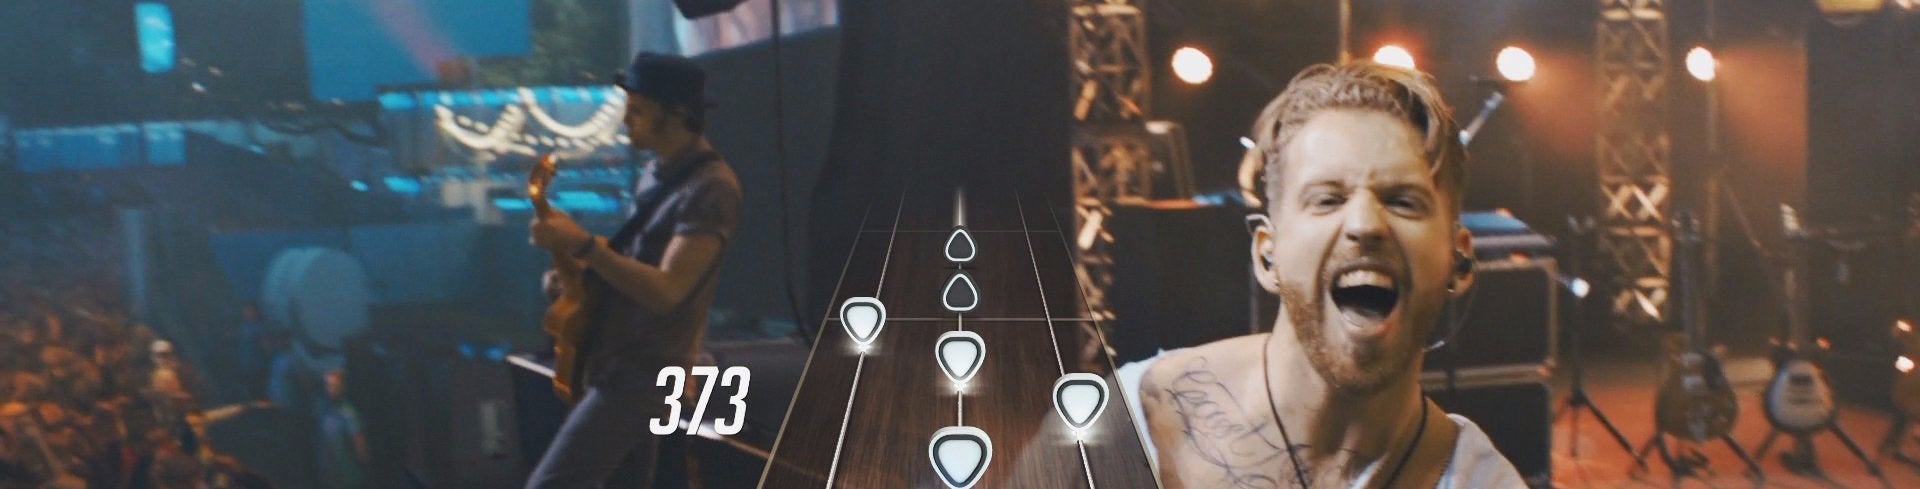 Image for Guitar Hero Live skips backwards compatibility as it reboots series